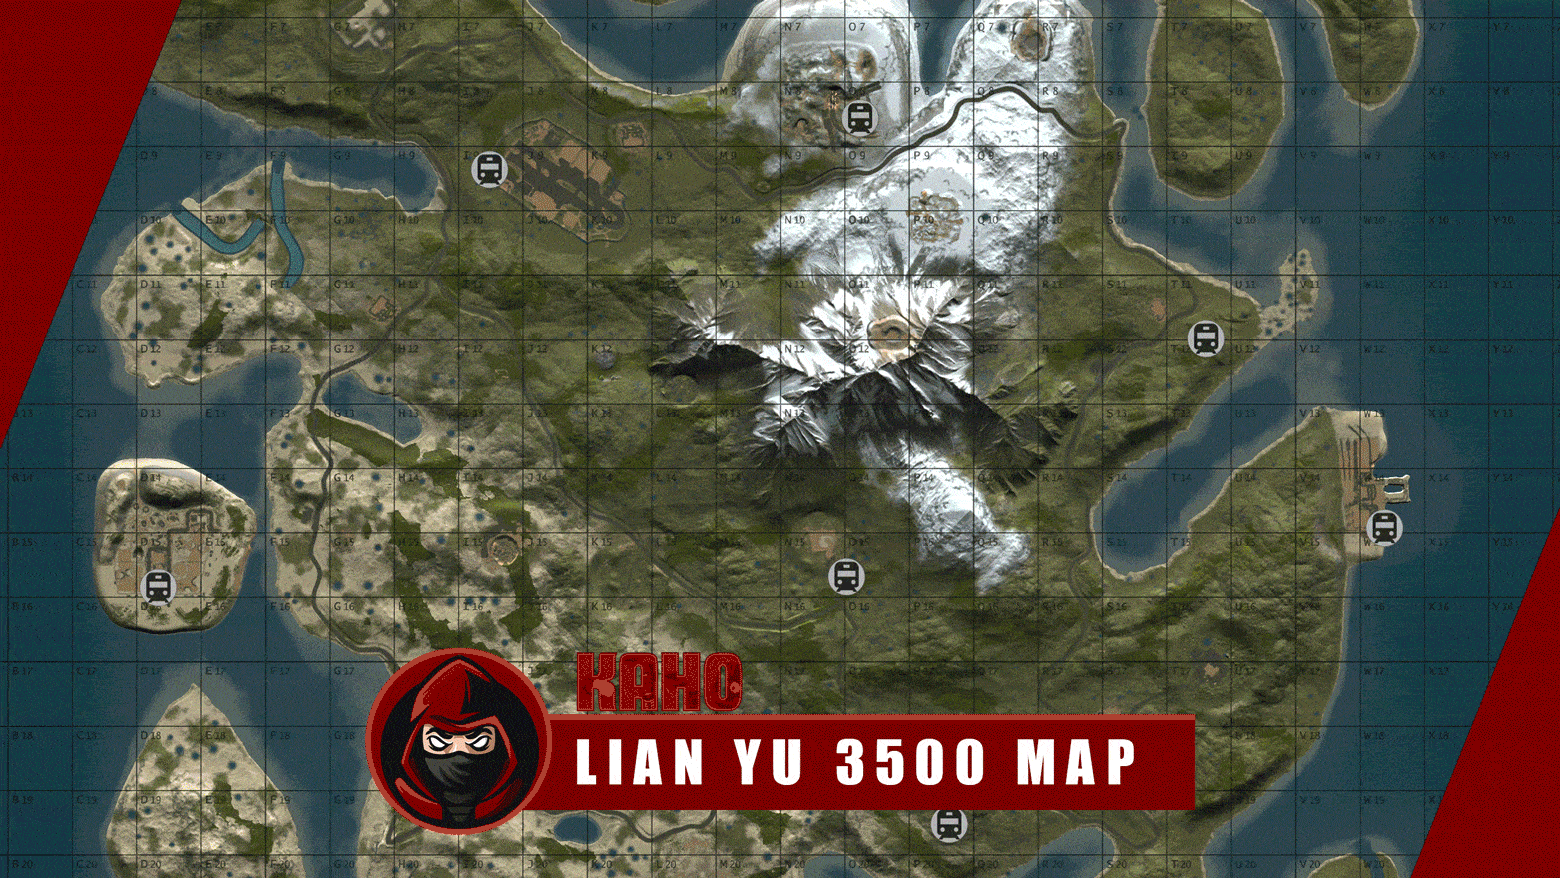 More information about "Lian Yu - 3500 Map by Kaho"